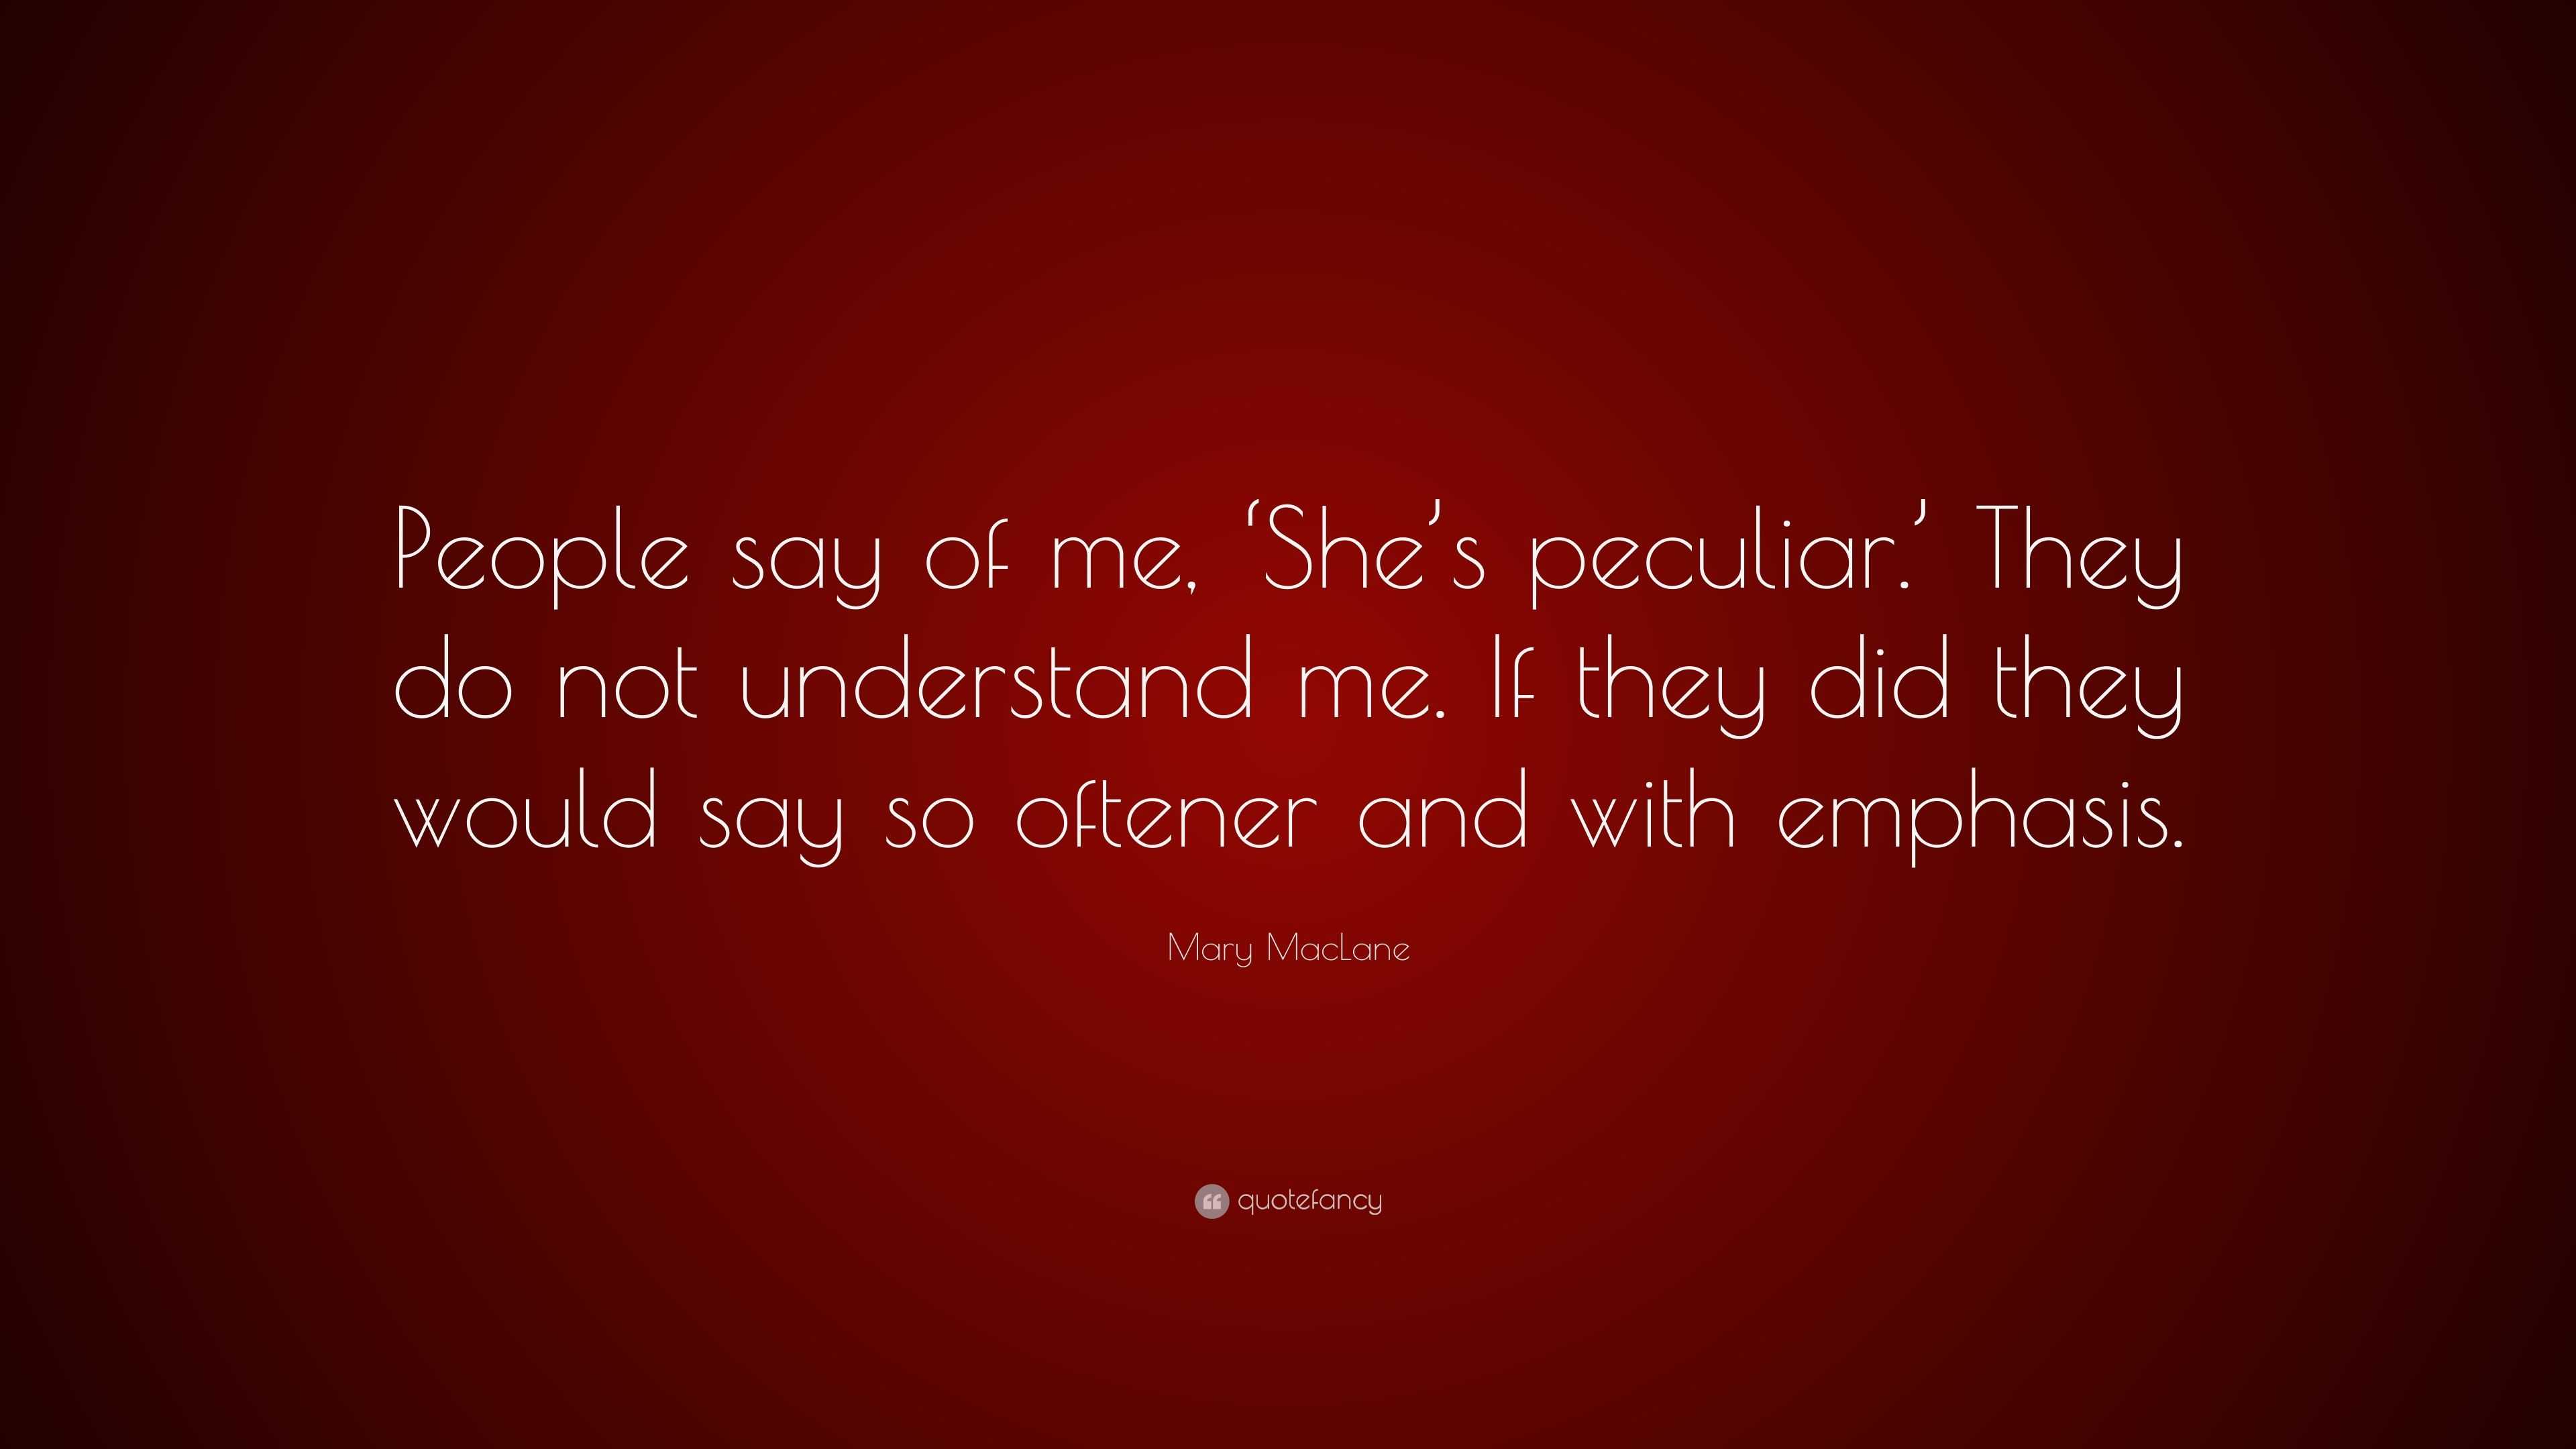 Mary MacLane Quote: “People say of me, ‘She’s peculiar.’ They do not ...